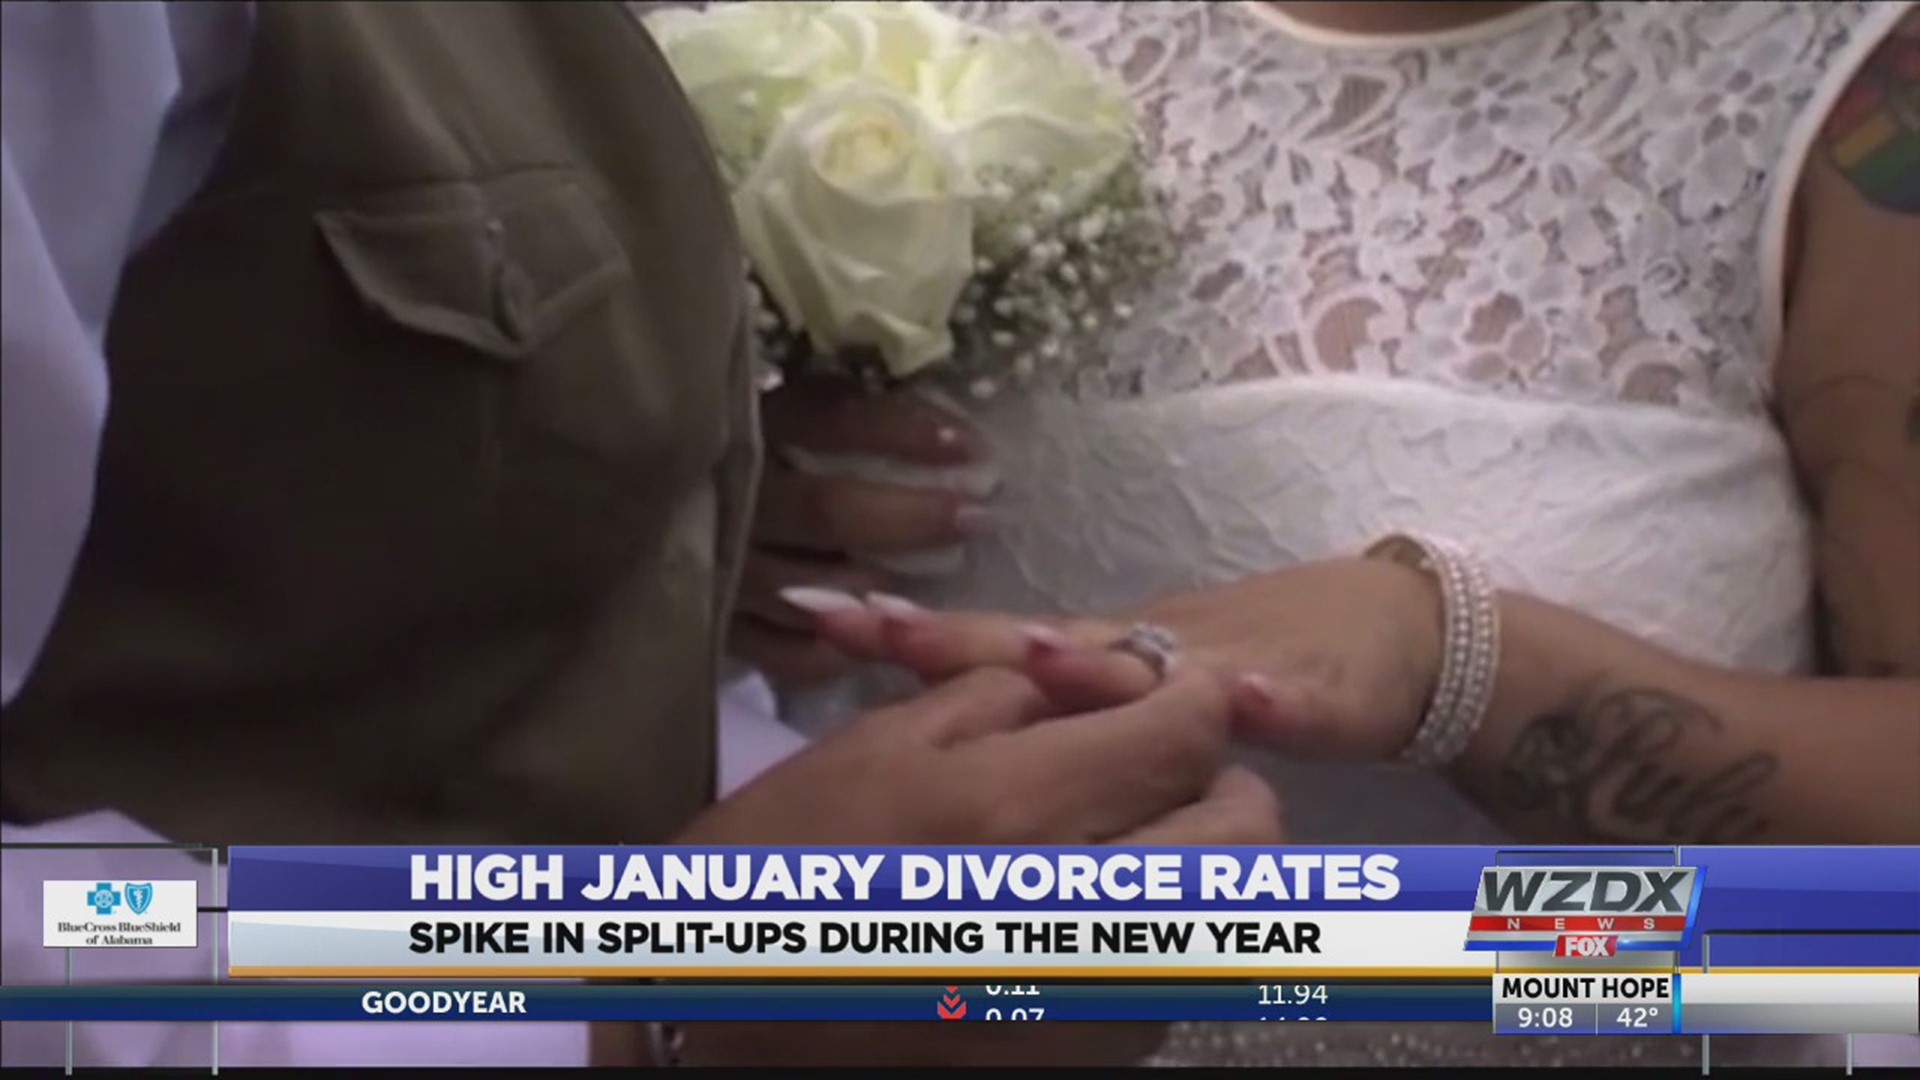 January marks the start of the new year, and for many, the chance to start over. But, it's also known as the "Divorce Month" with some of the highest divorce rates of the year.